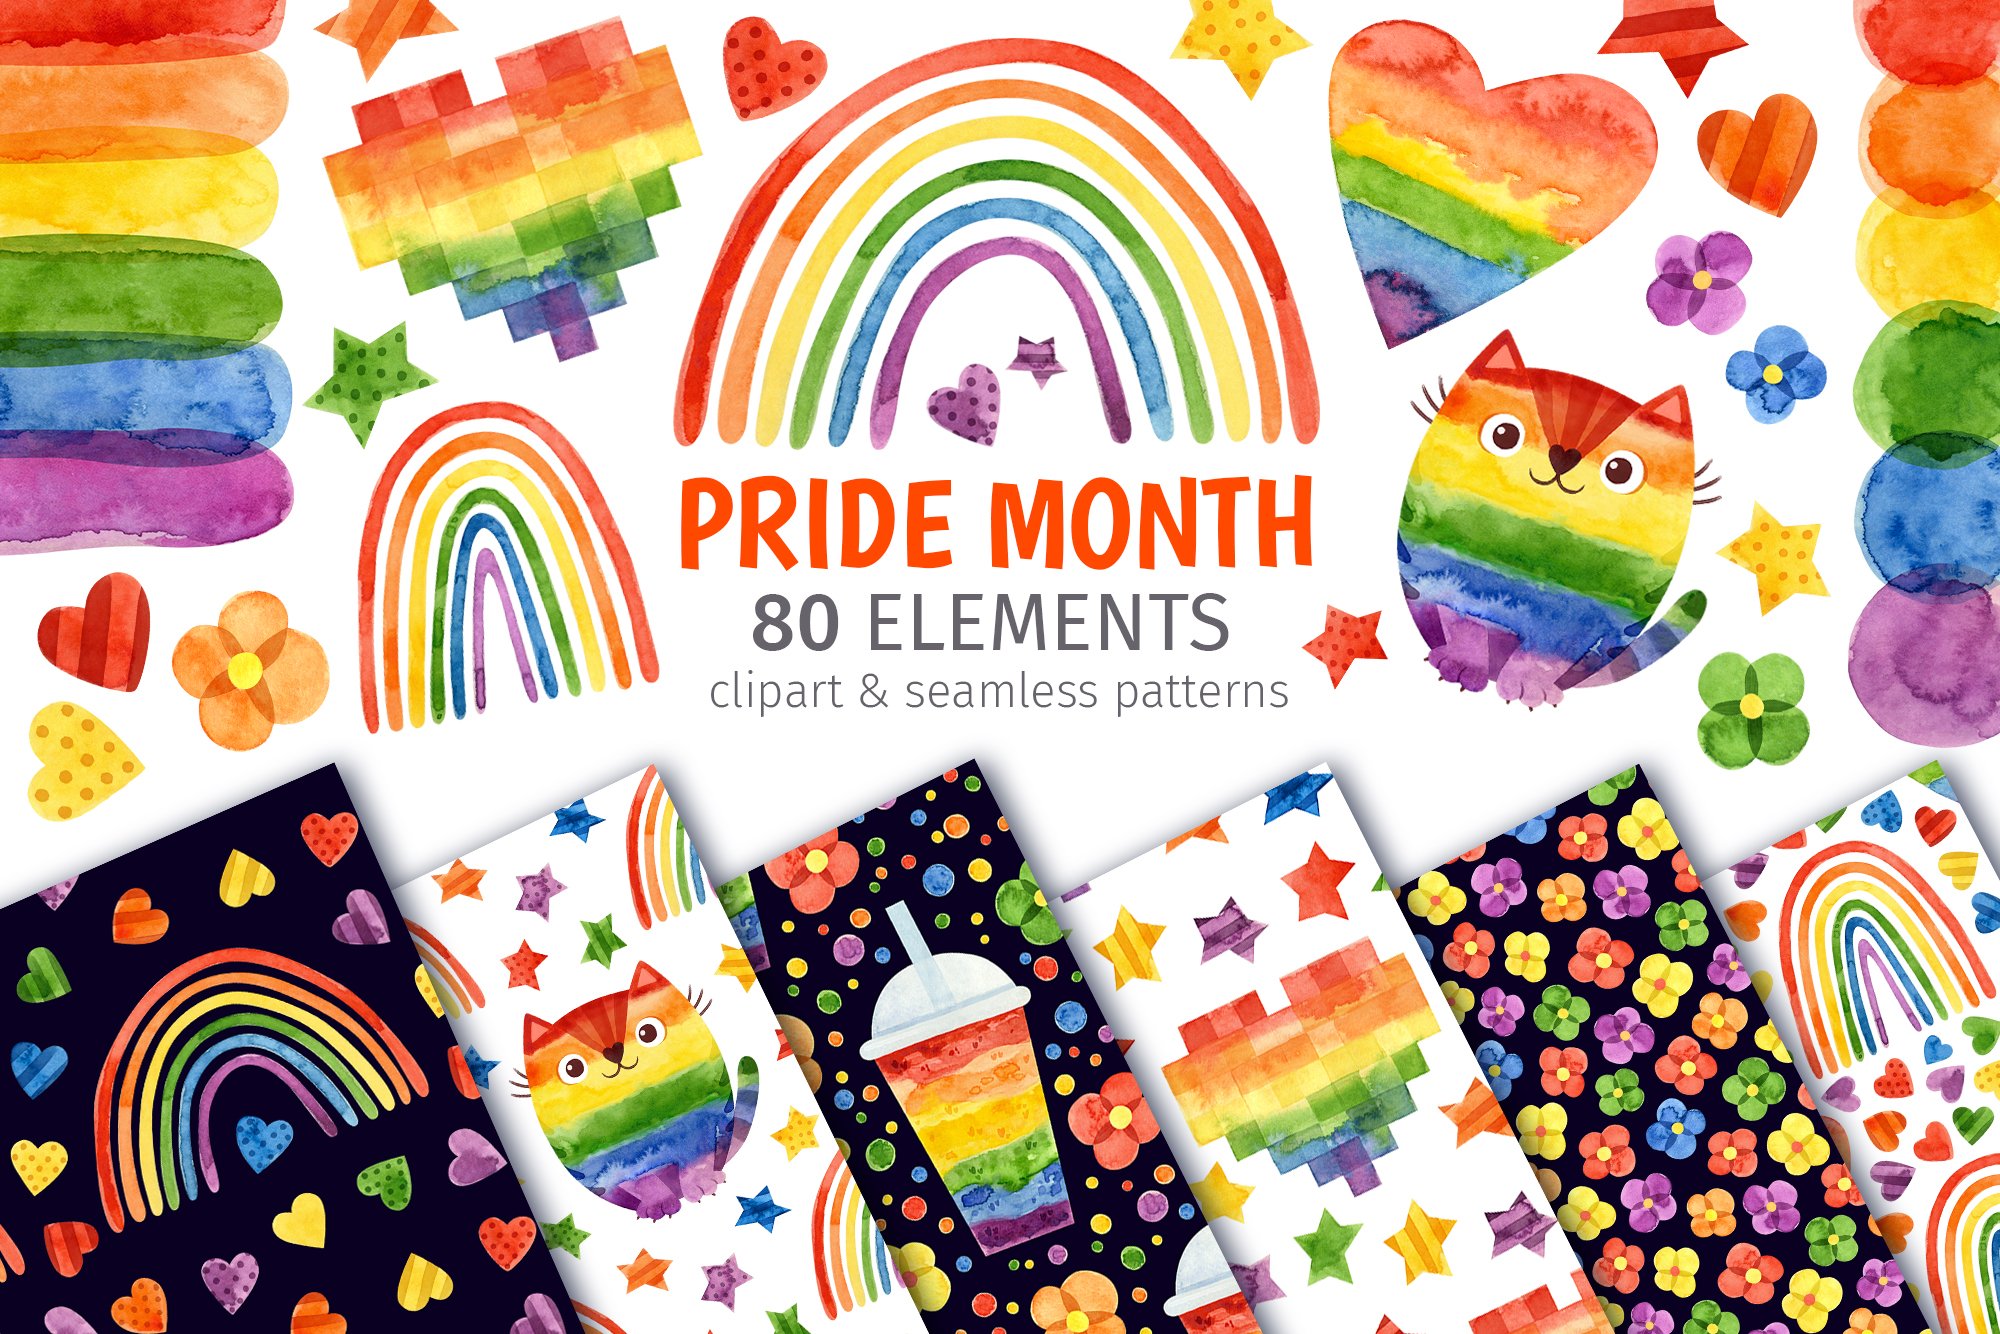 LGBT pride month clipart & patterns cover image.